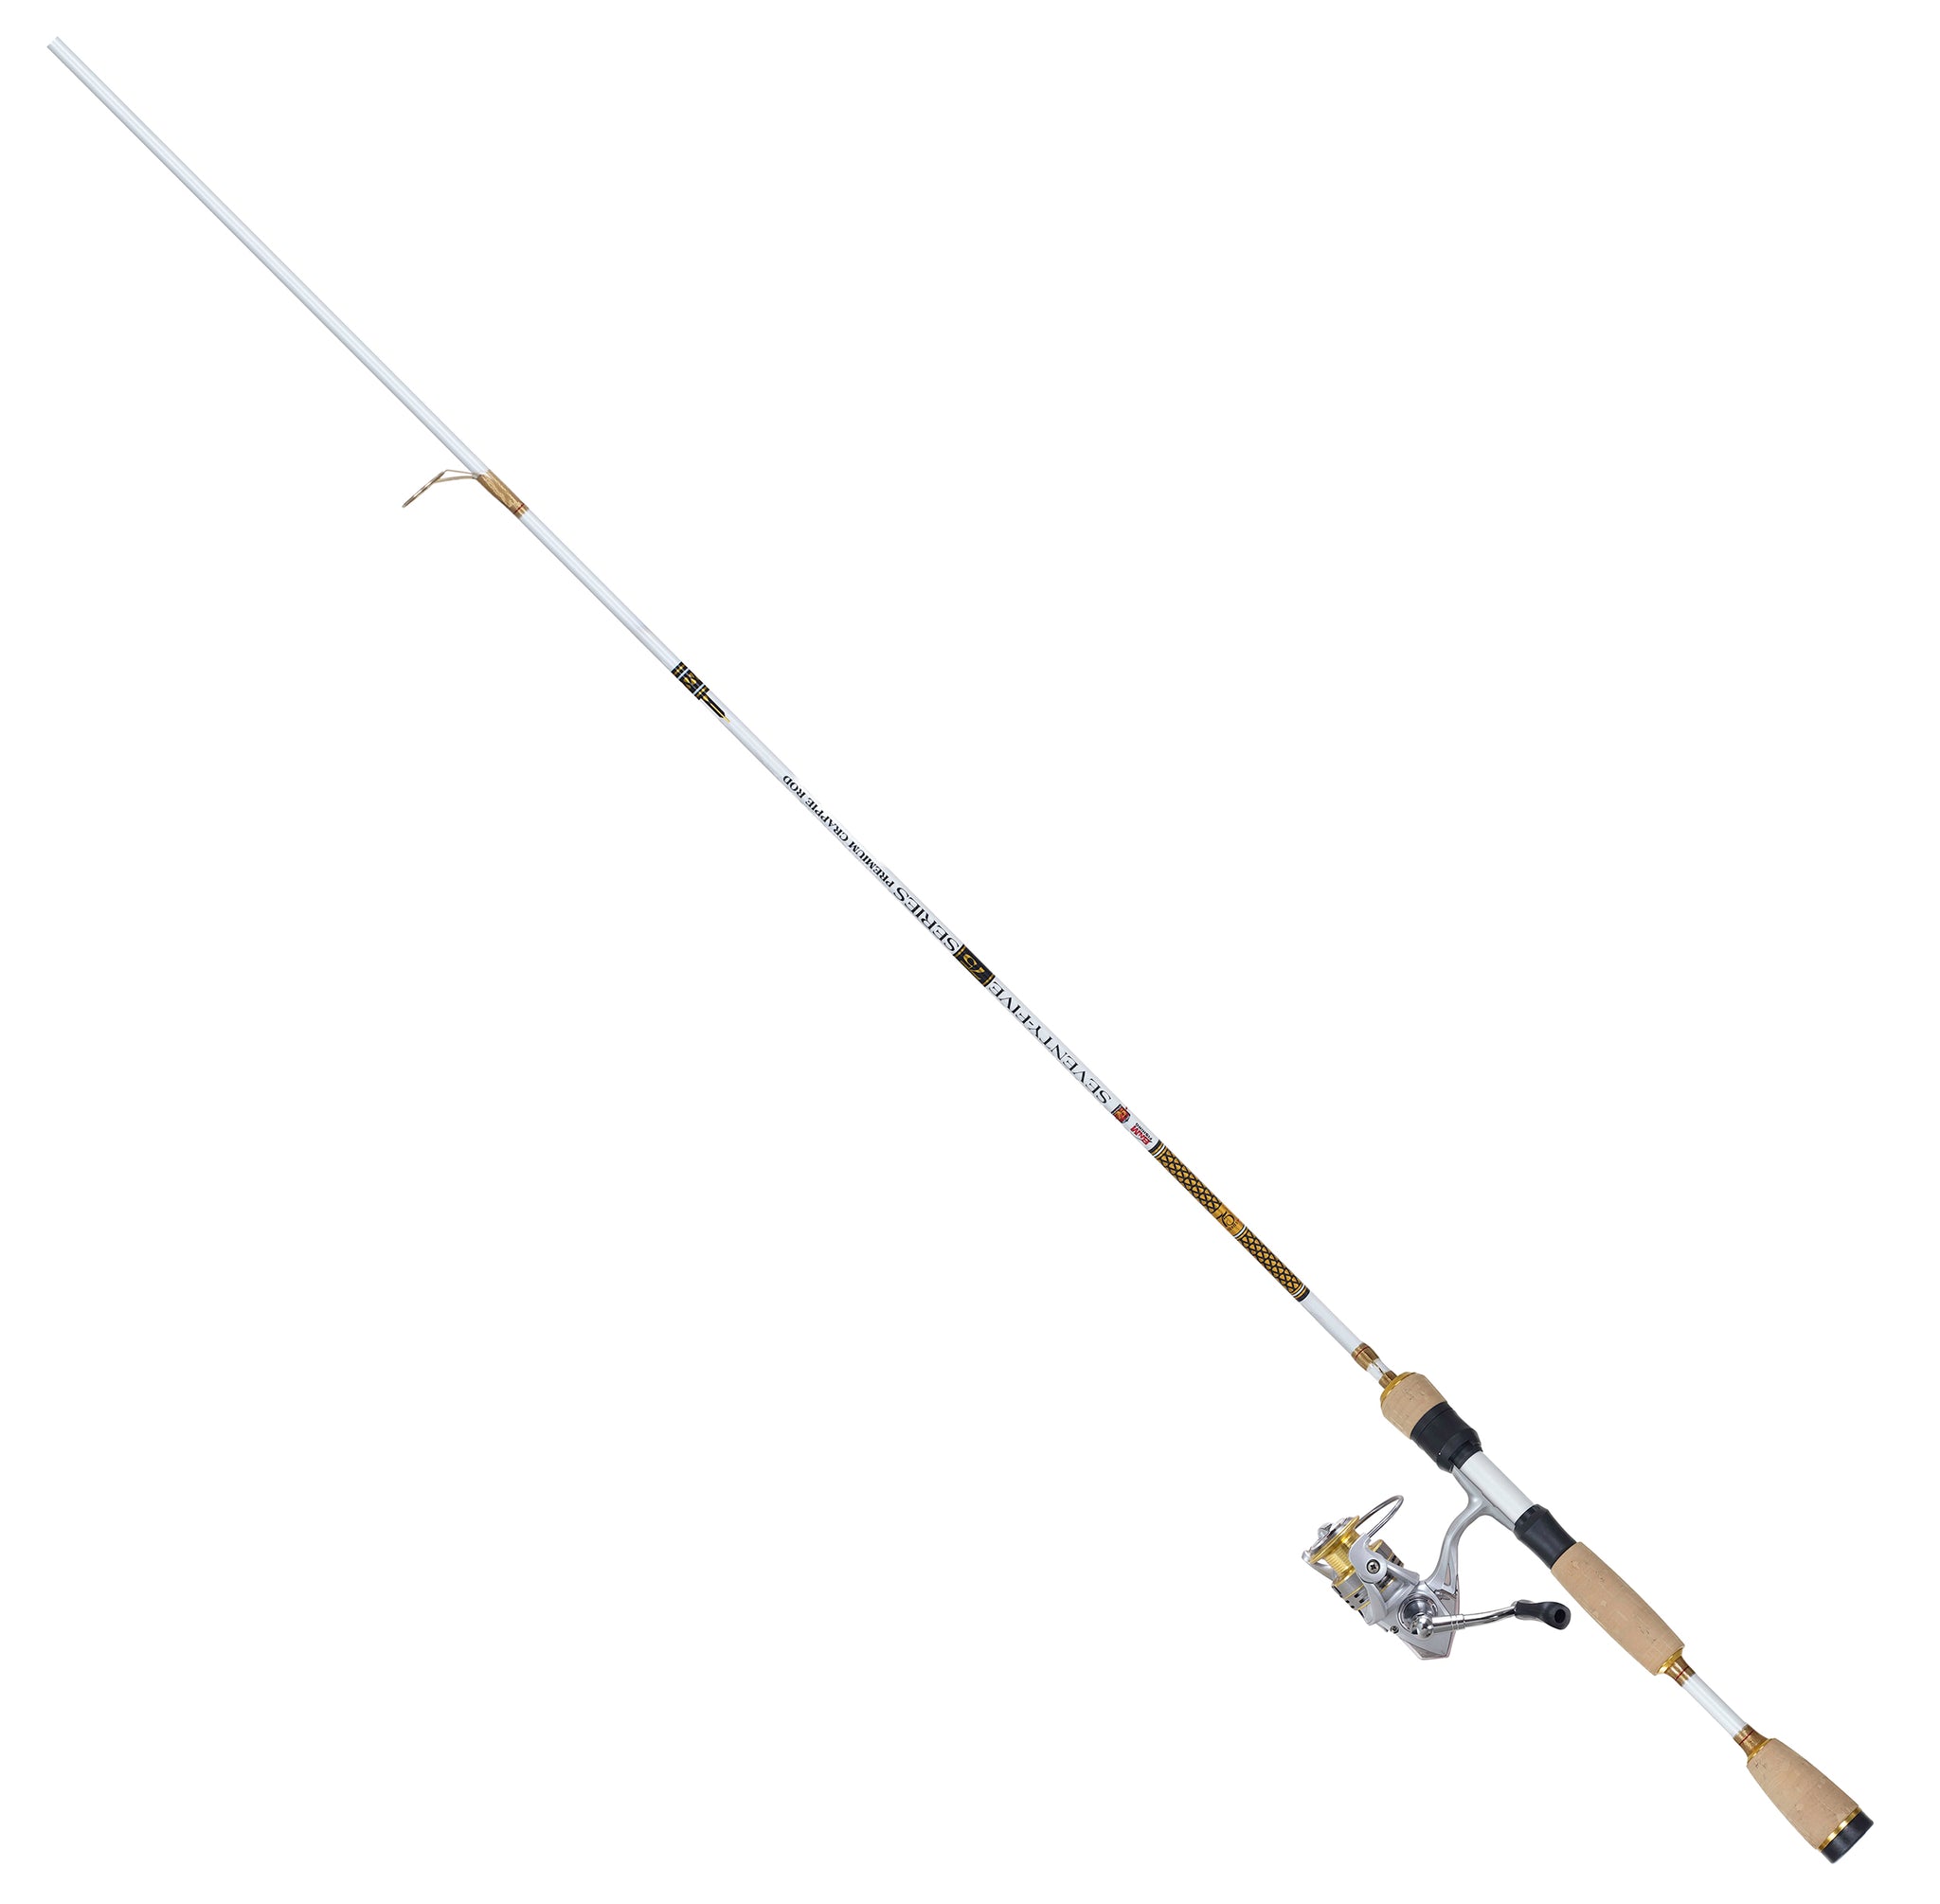 B&M ANG75S-100-2 7.5 ft. 75 Series Spinning Rod Combo